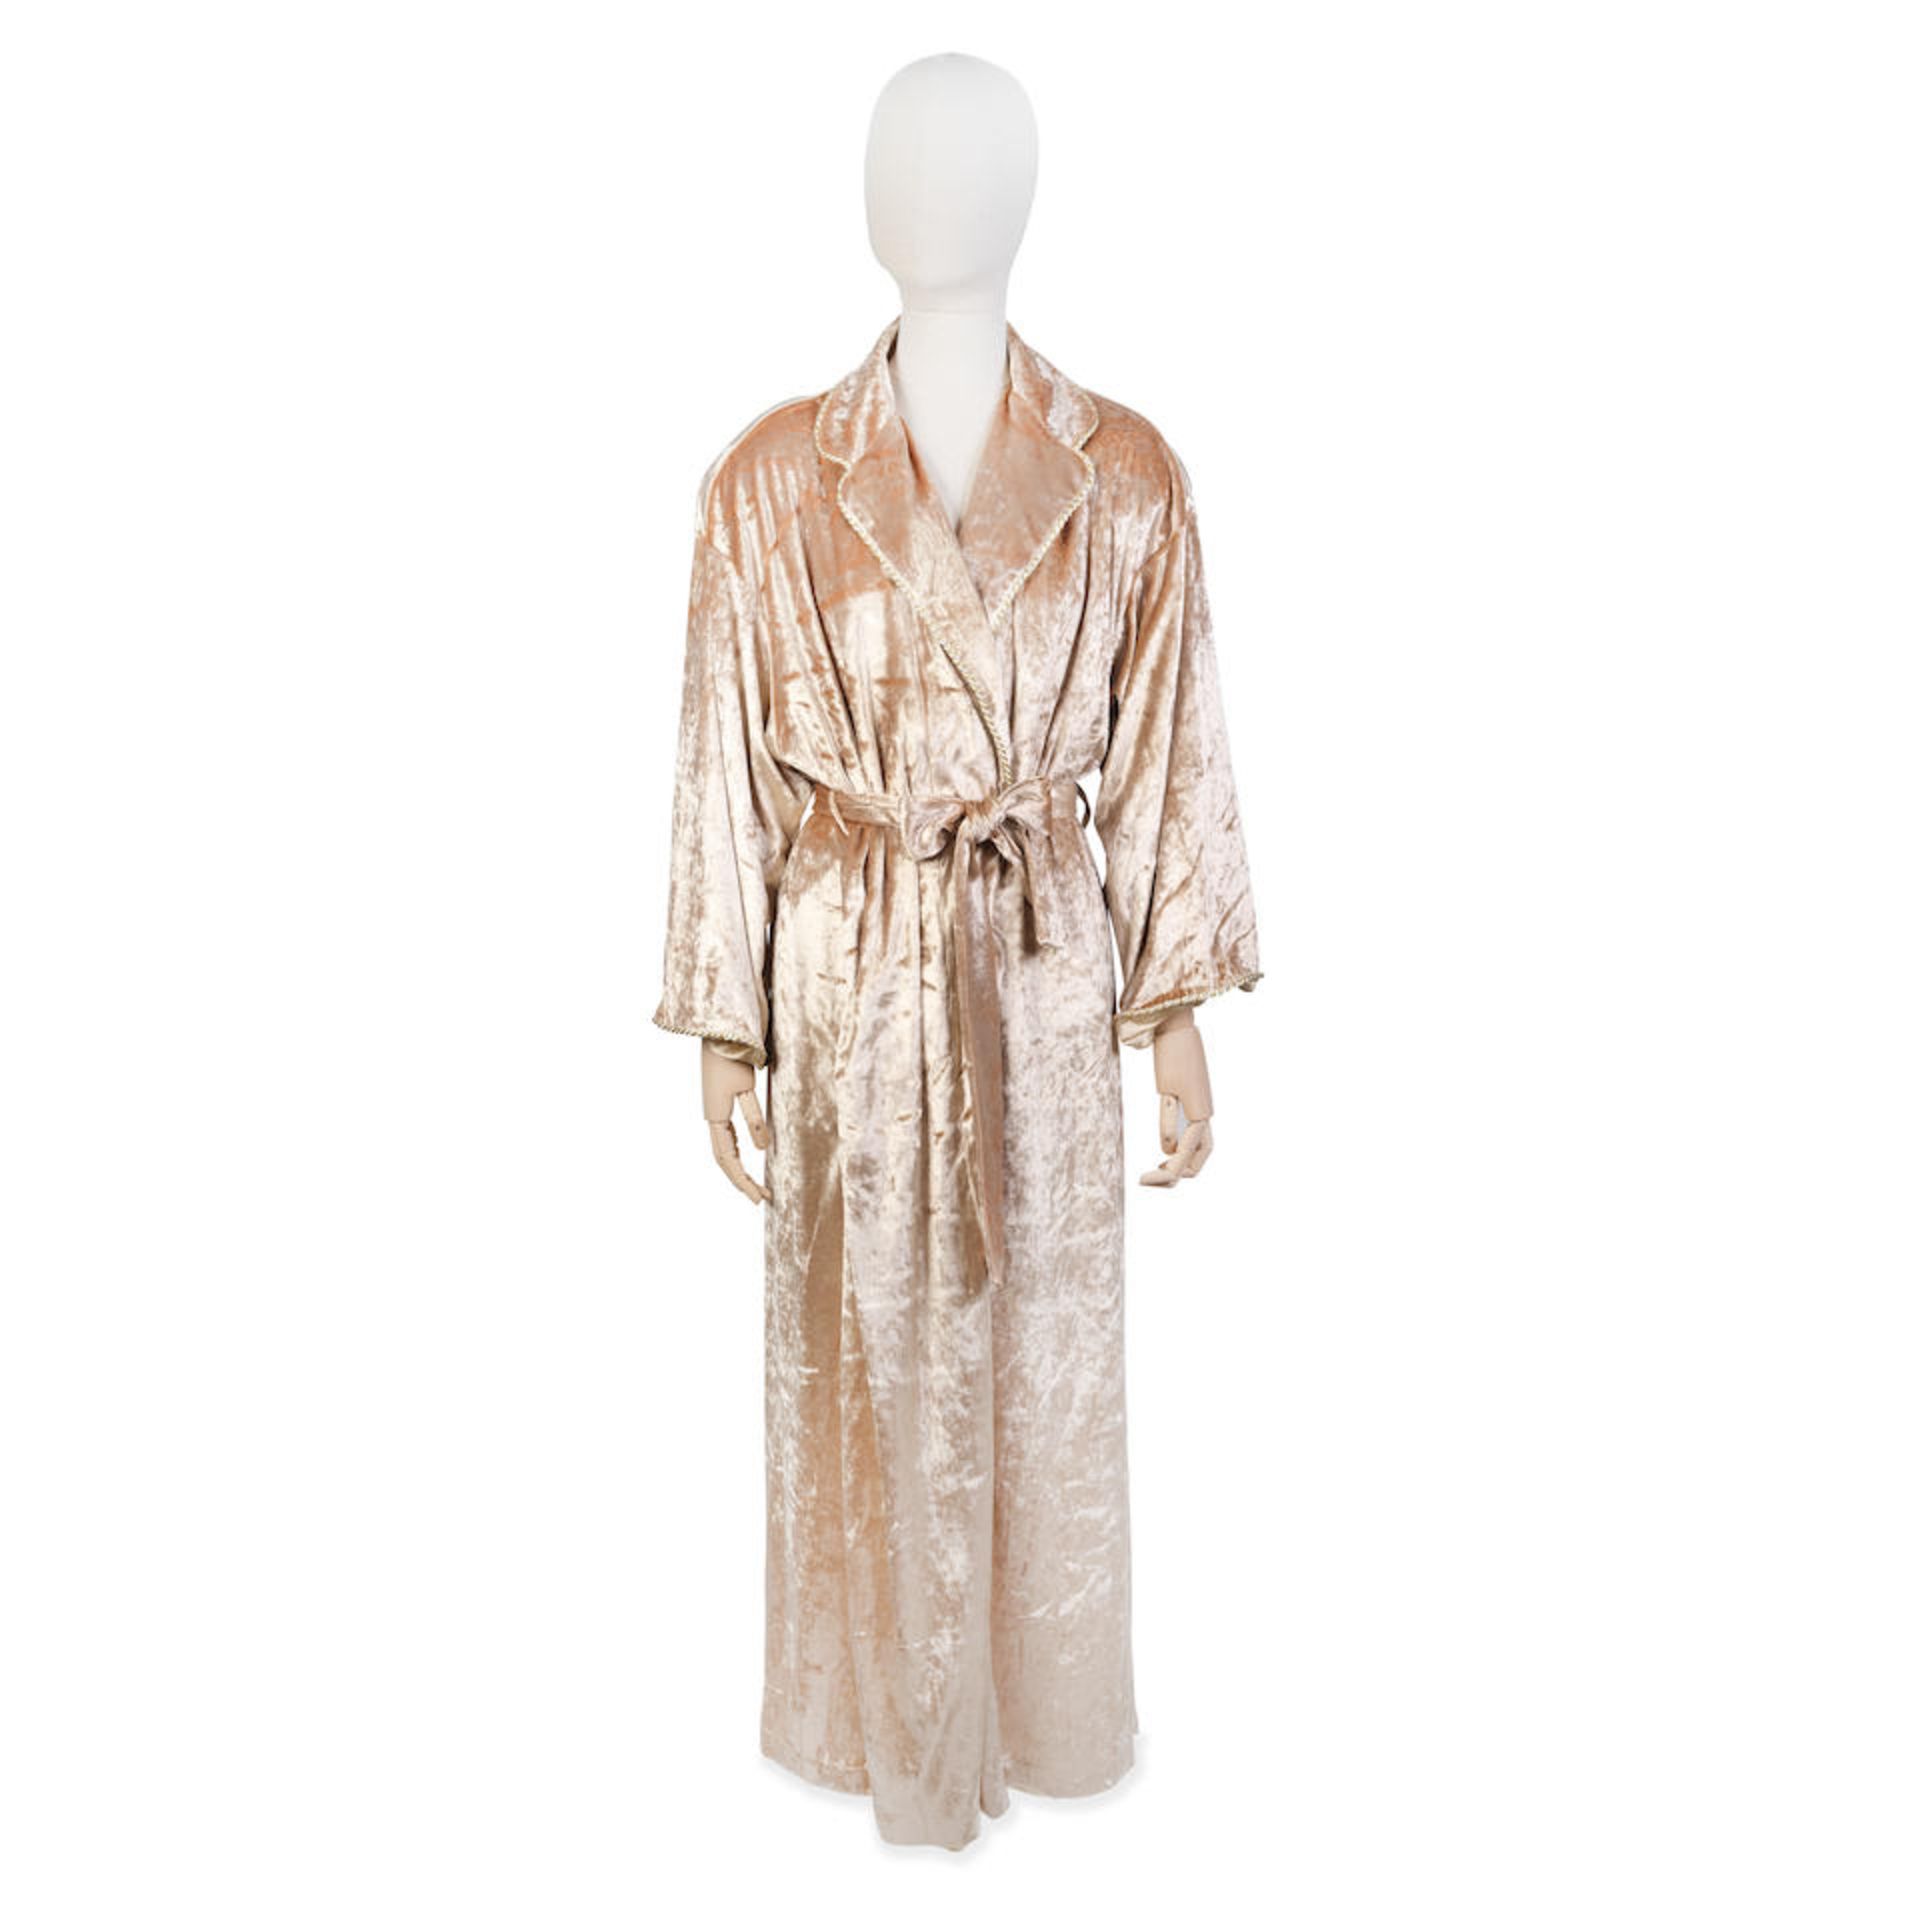 Valentino Intimo: a Gold Crushed Velvet Dressing Gown 1990s